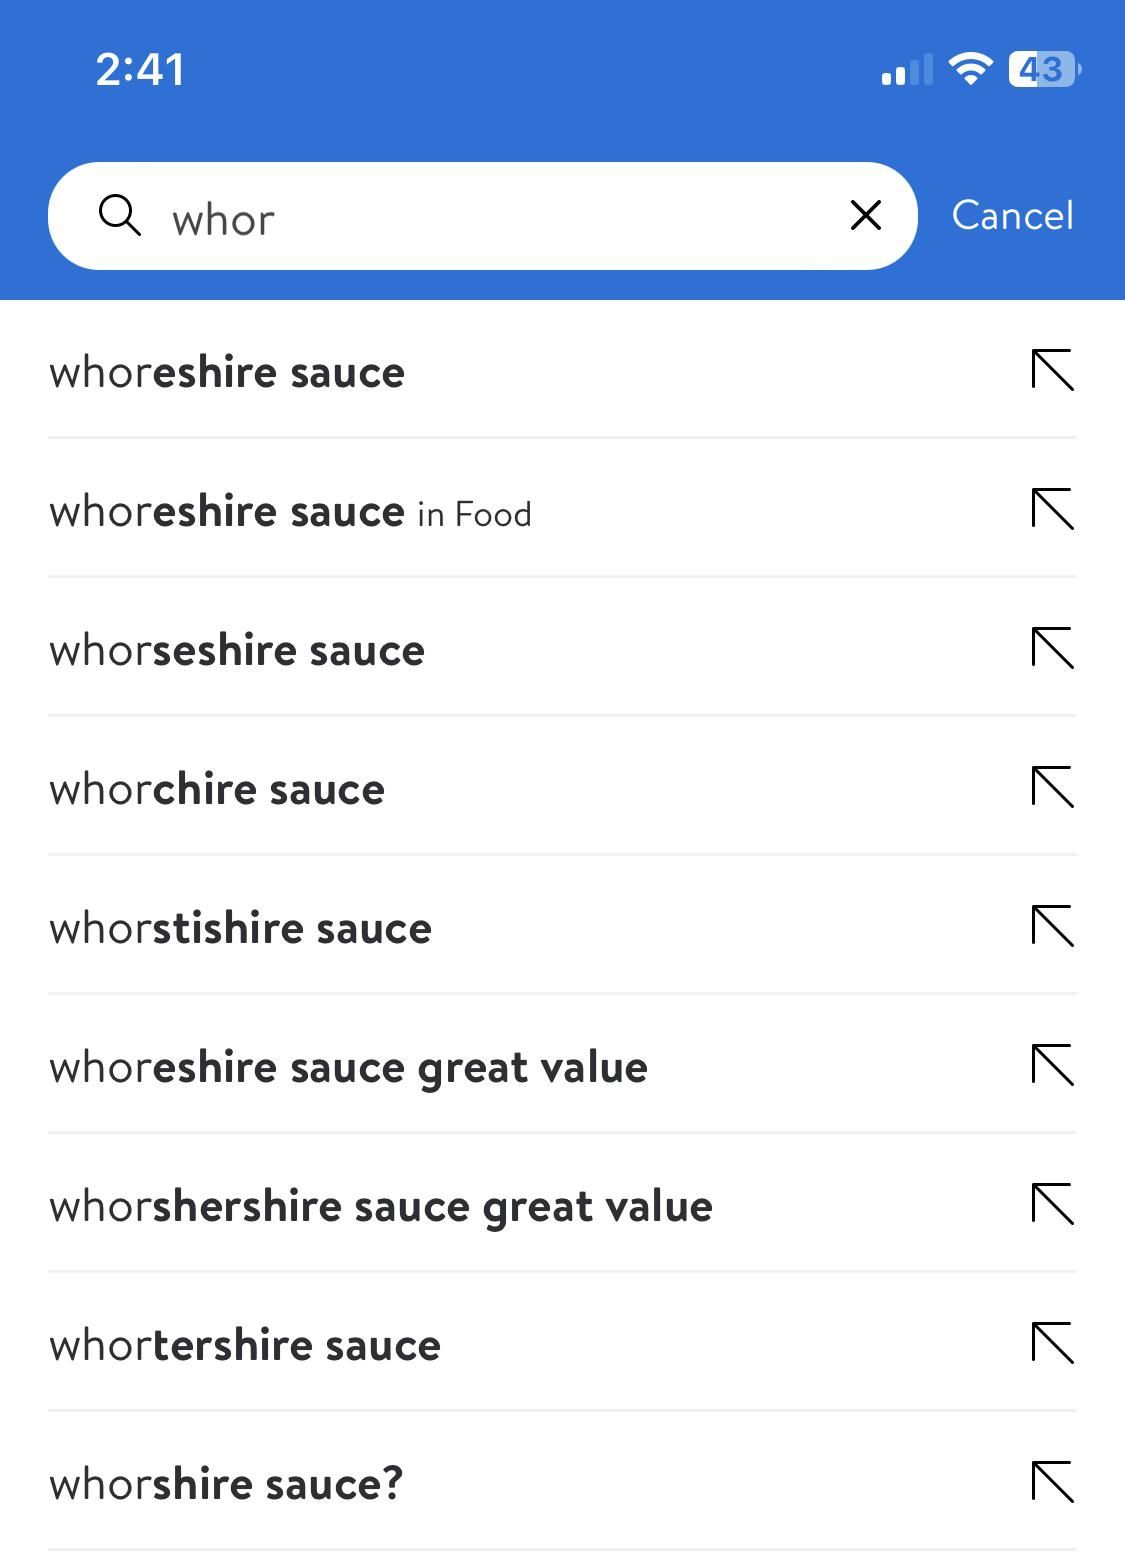 I couldn’t remember how to spell Worcestershire sauce while ordering from Walmart, so I expected the search bar suggestions to tell me…